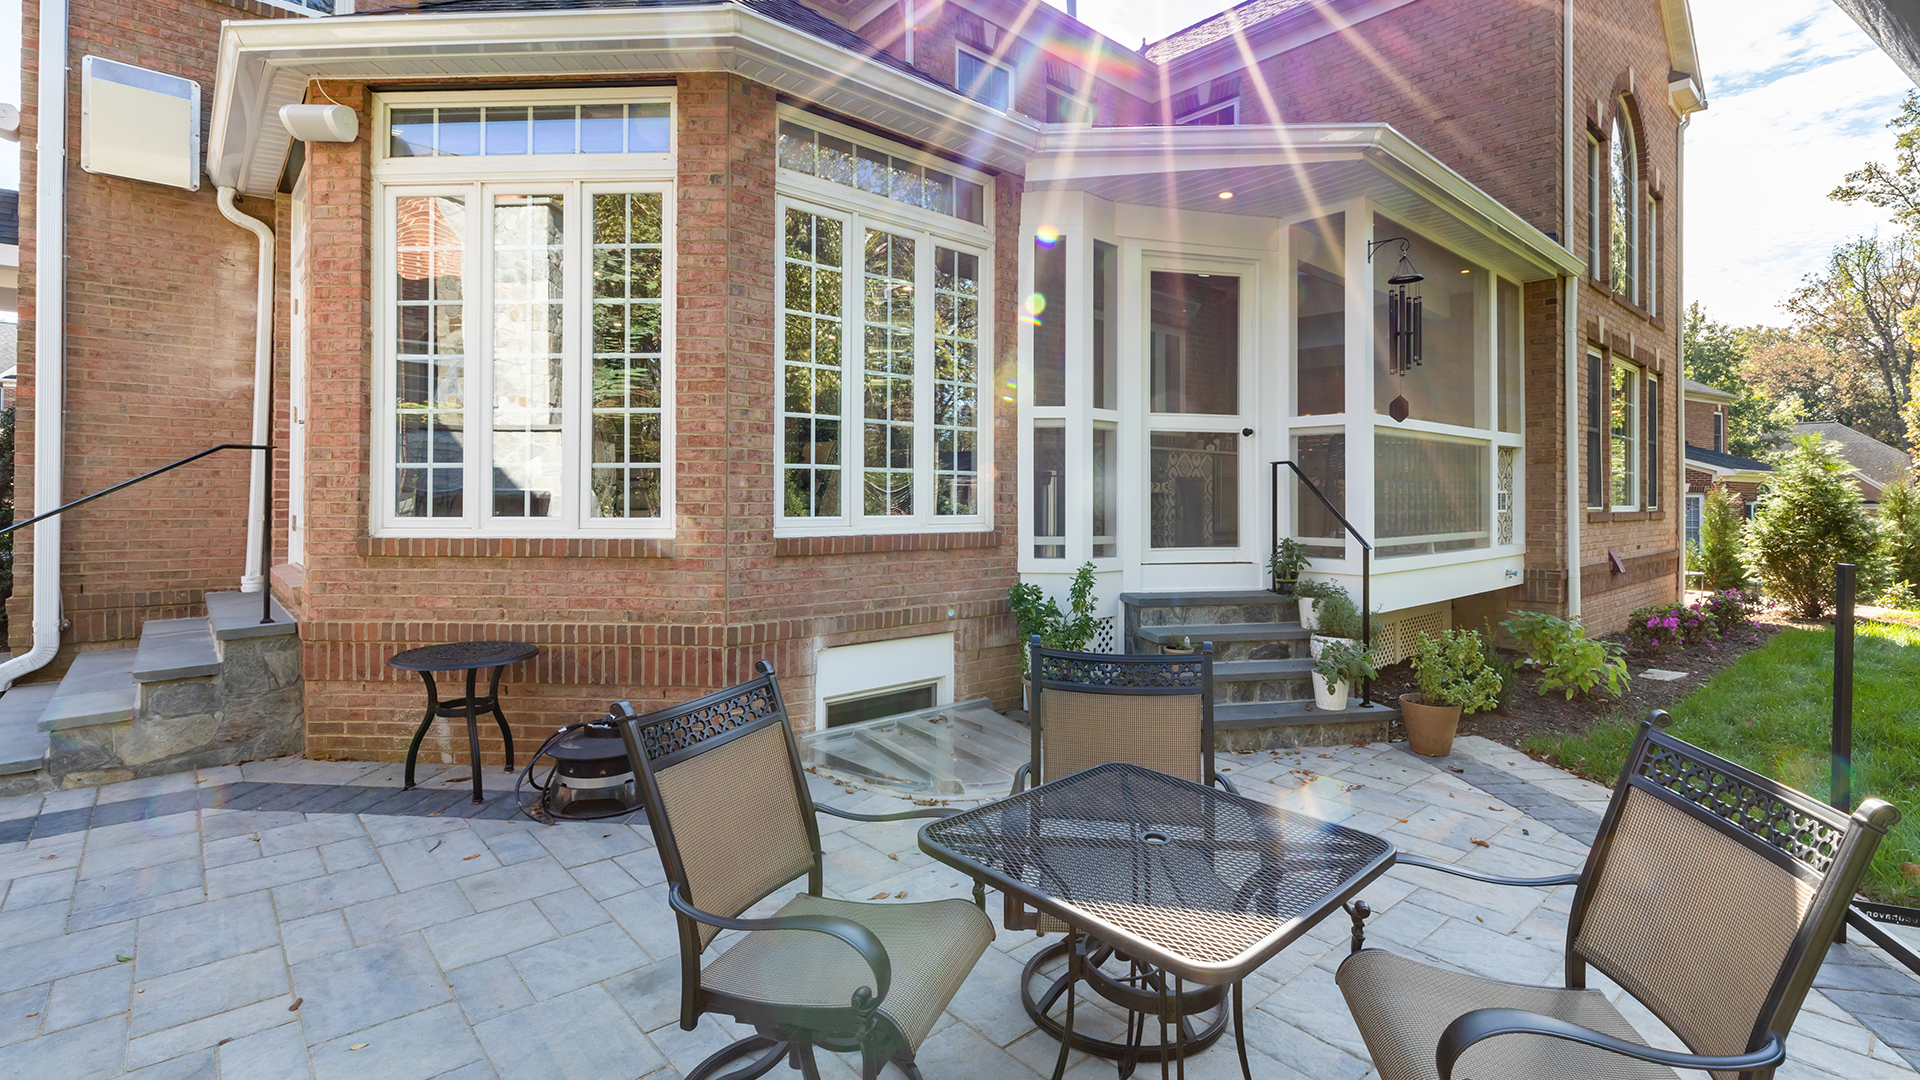 2022 PRO Mid Atlantic Remodeler of the Year, Grand Award Entire House $350,000 – $550,000